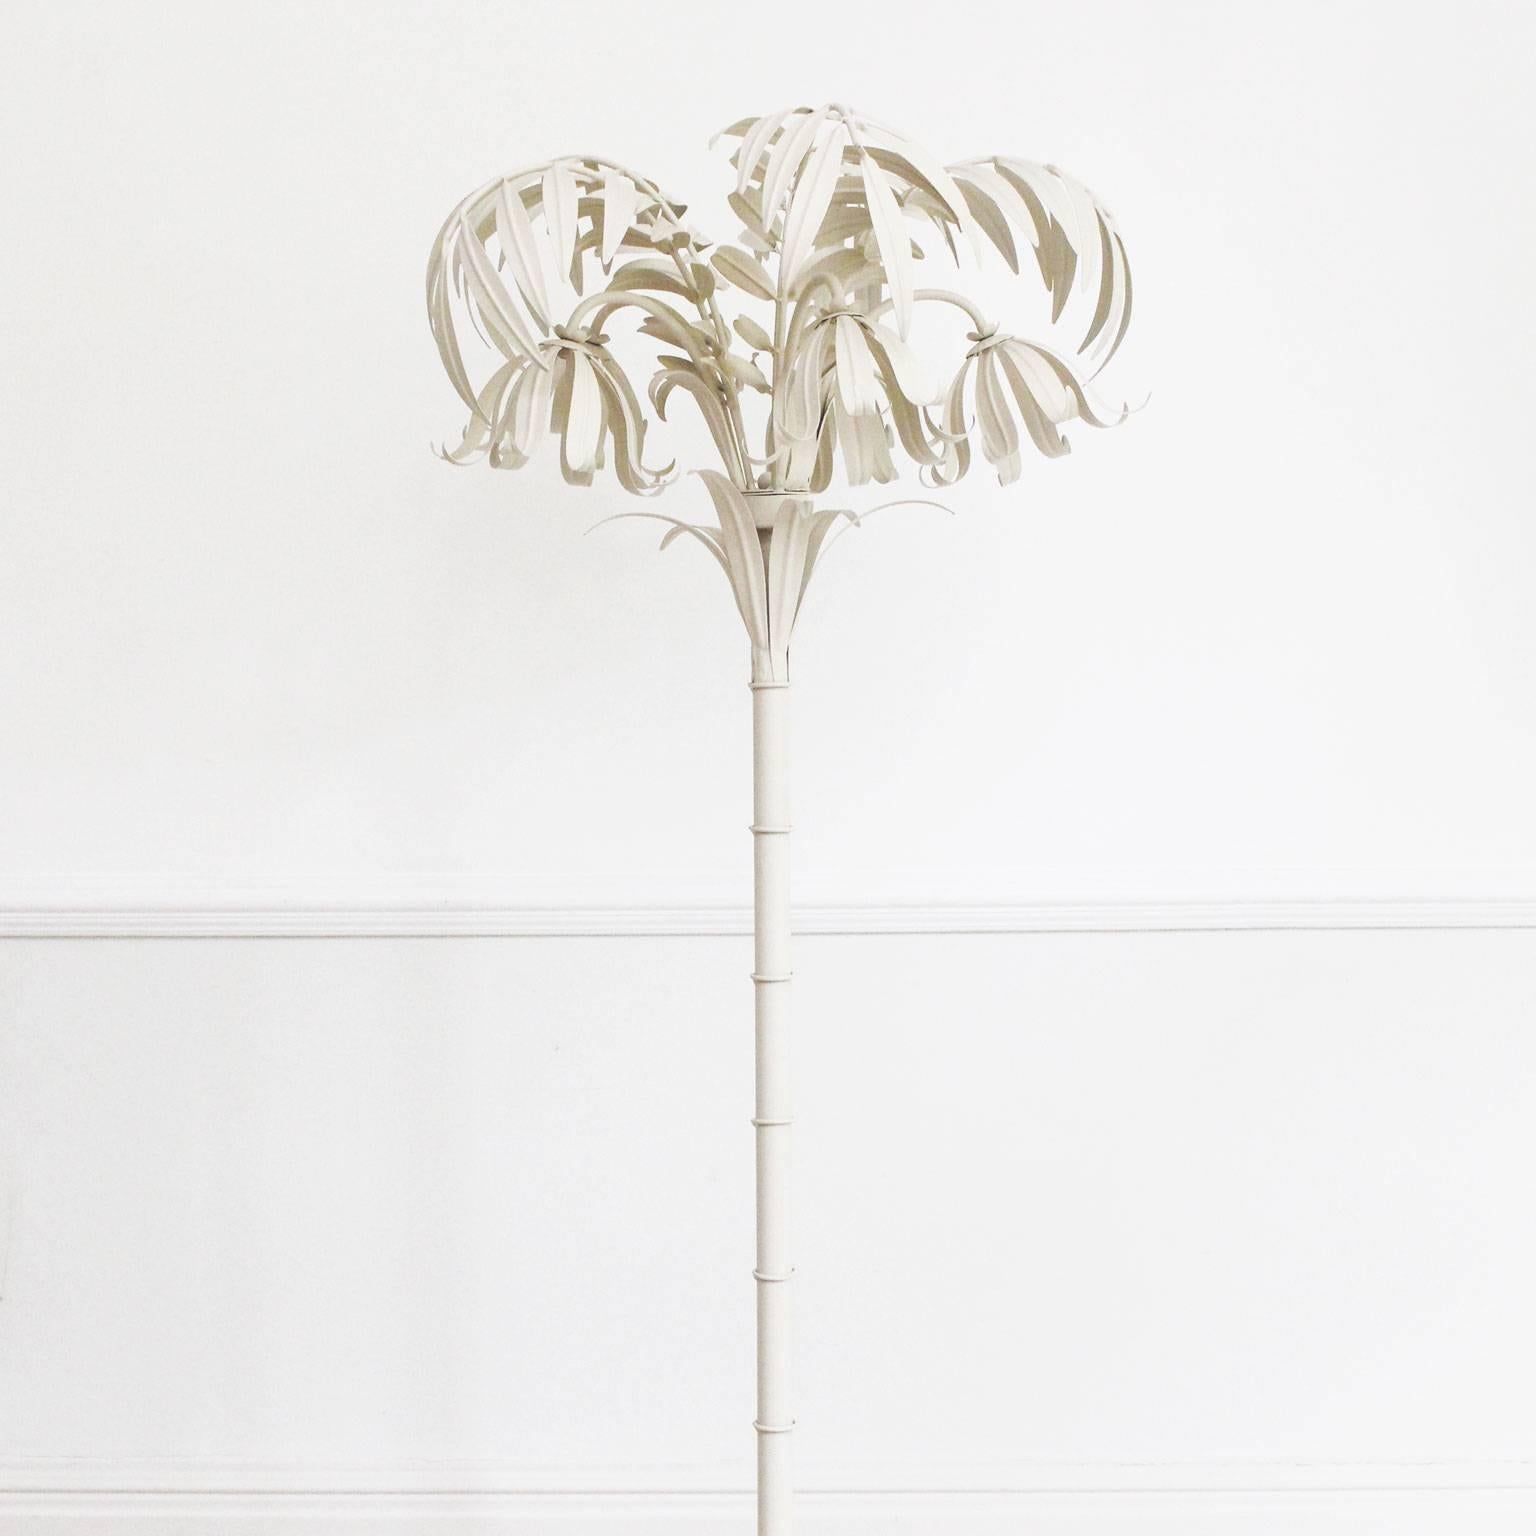 It is not really possible to show just how fabulous this light is in a photograph but we have tried. This highly decorative piece is shaped like a palm tree and made from painted metal. Hidden within the palm leaves are five lights. As you will see